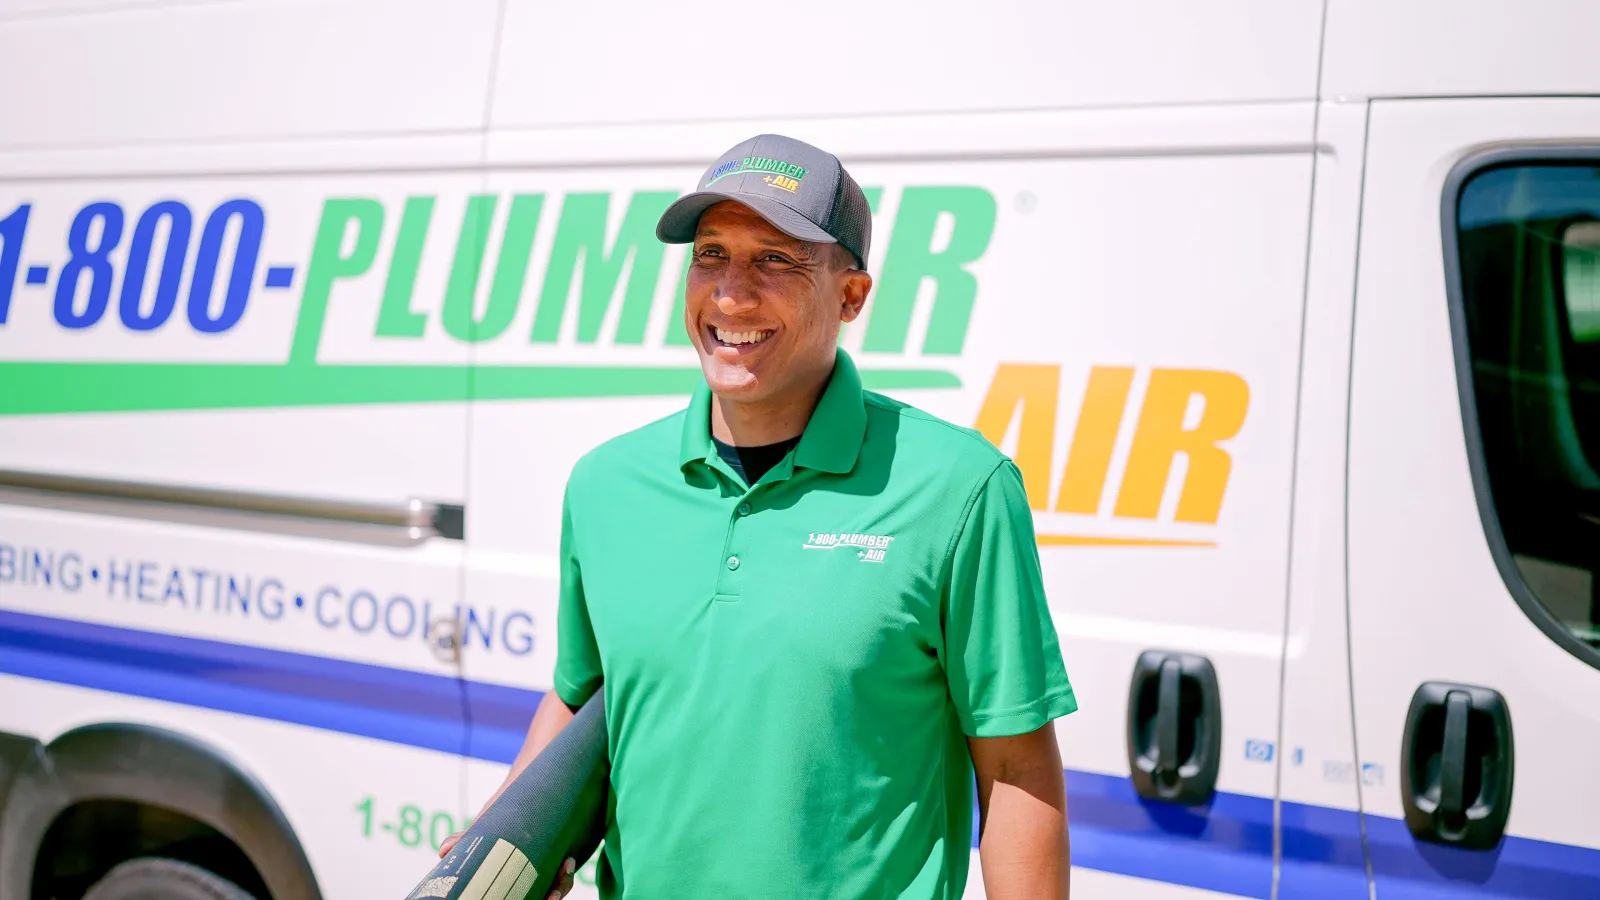 A 1-800-Plumber +Air of Scottsdale technician